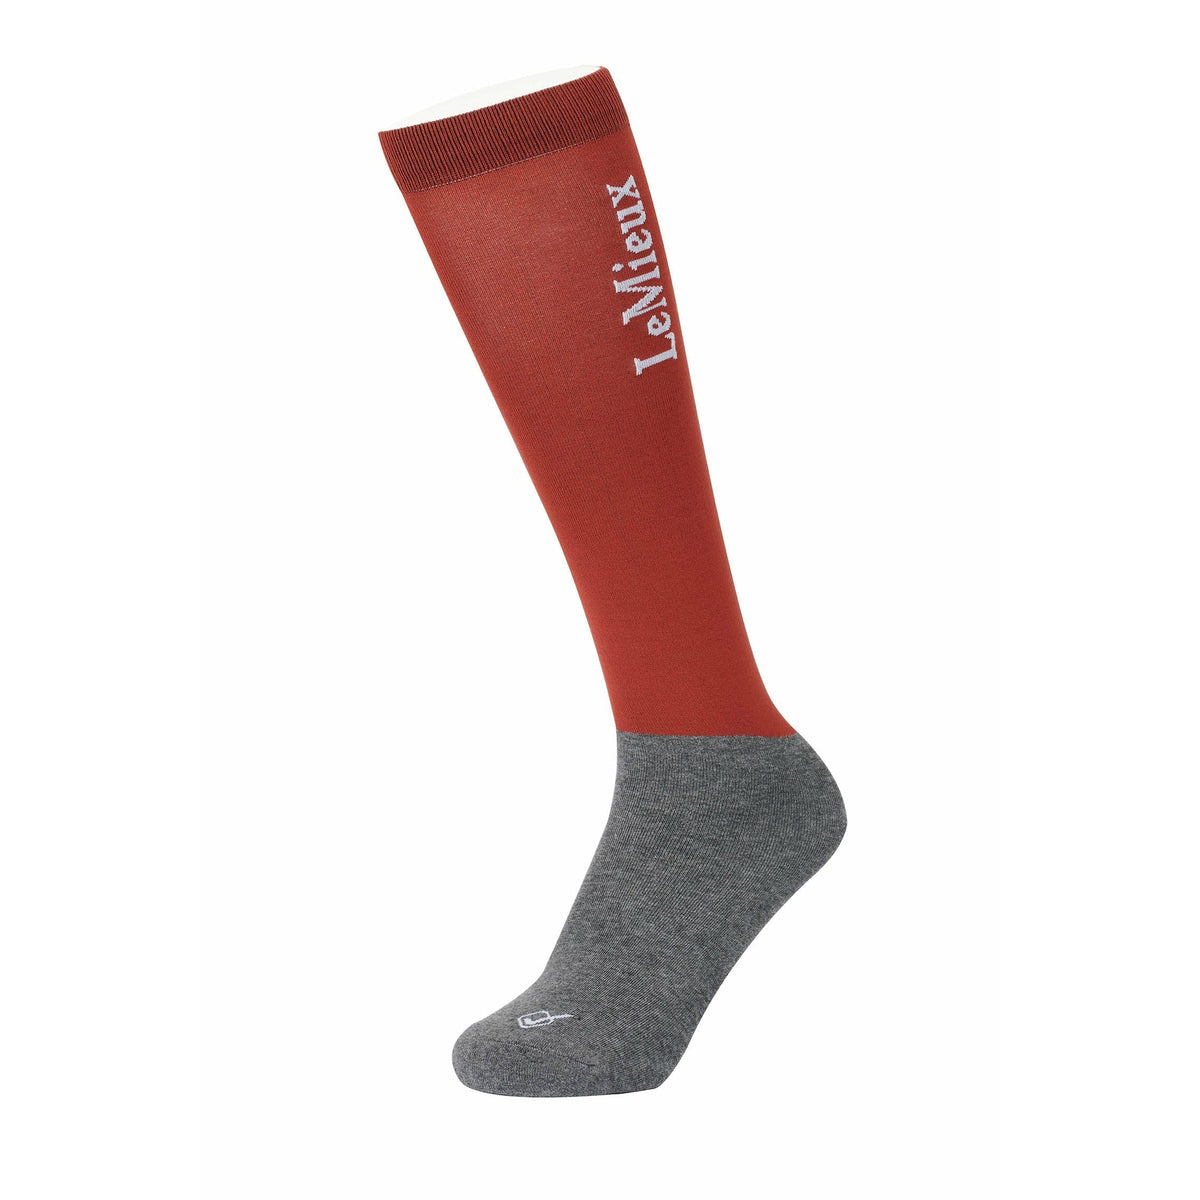 LEMIEUX SIENNA / S LeMieux Competition Socks - Twin Pack in Sienna